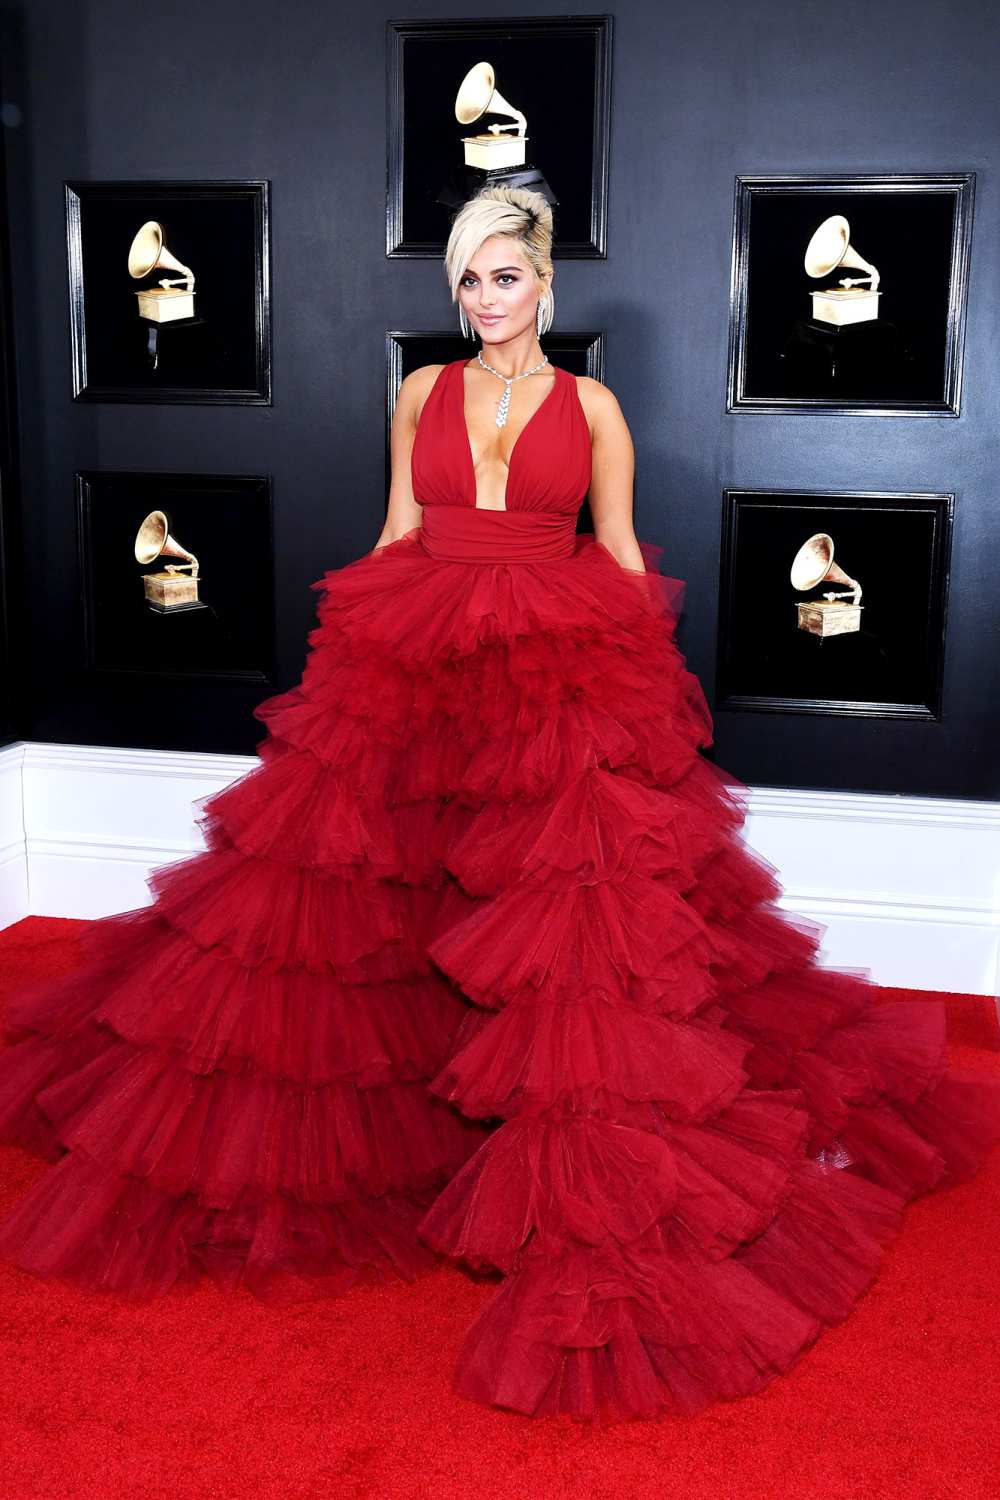 Bebe Rexha Admits She Was "Really Hurt" When No Designer Would Dress Her For Grammys